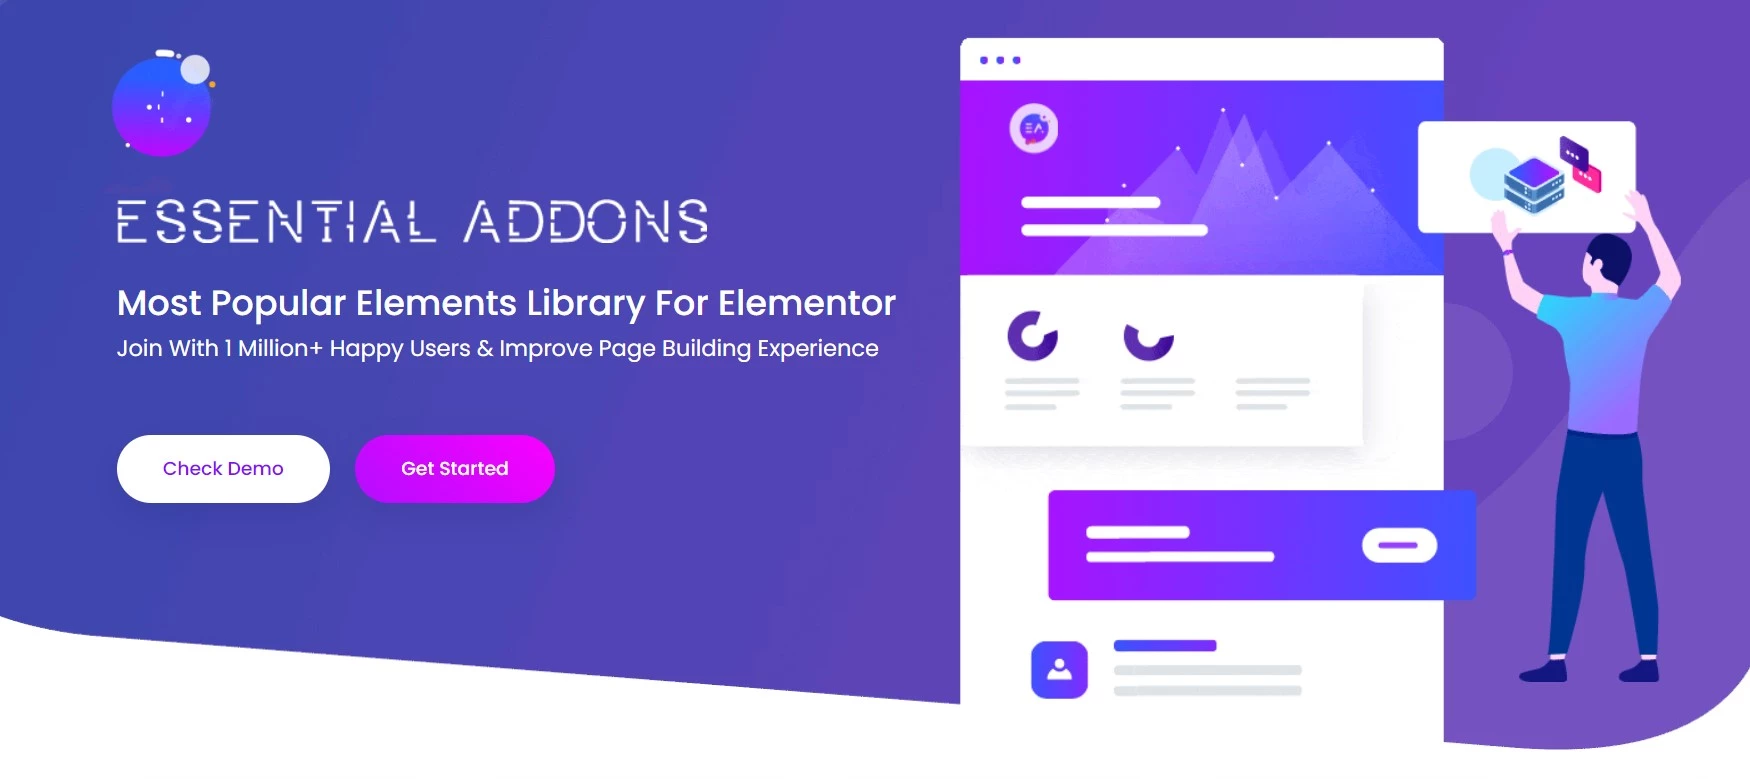 Essential Addons Review Features 